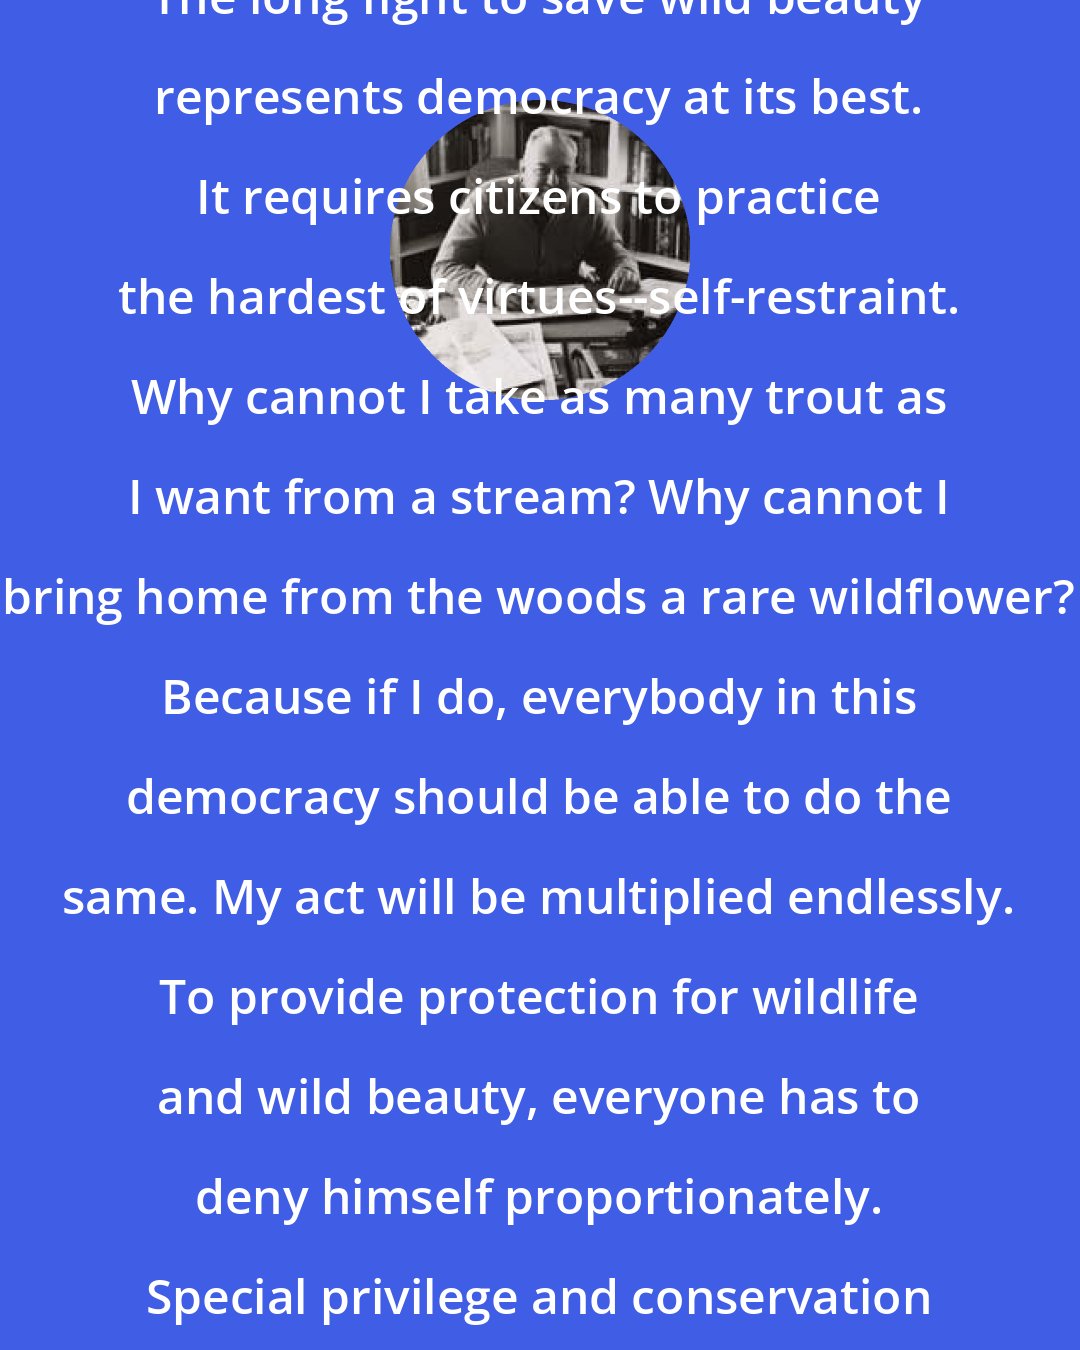 Edwin Way Teale: The long fight to save wild beauty represents democracy at its best. It requires citizens to practice the hardest of virtues--self-restraint. Why cannot I take as many trout as I want from a stream? Why cannot I bring home from the woods a rare wildflower? Because if I do, everybody in this democracy should be able to do the same. My act will be multiplied endlessly. To provide protection for wildlife and wild beauty, everyone has to deny himself proportionately. Special privilege and conservation are ever at odds.